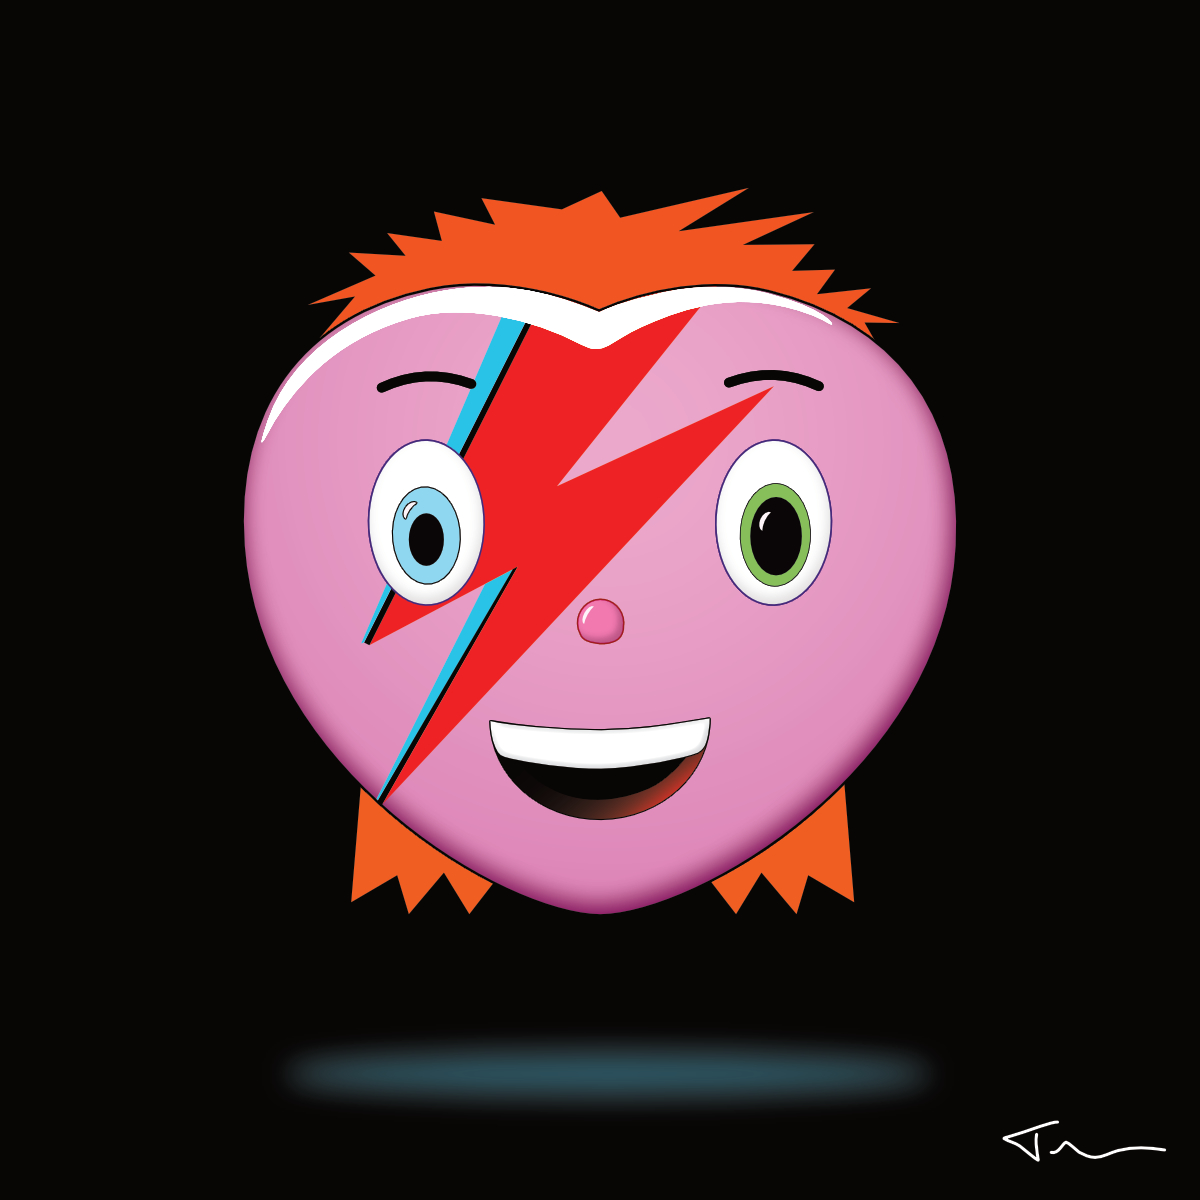 SMILEY-as-BOWIE-on-BLACK